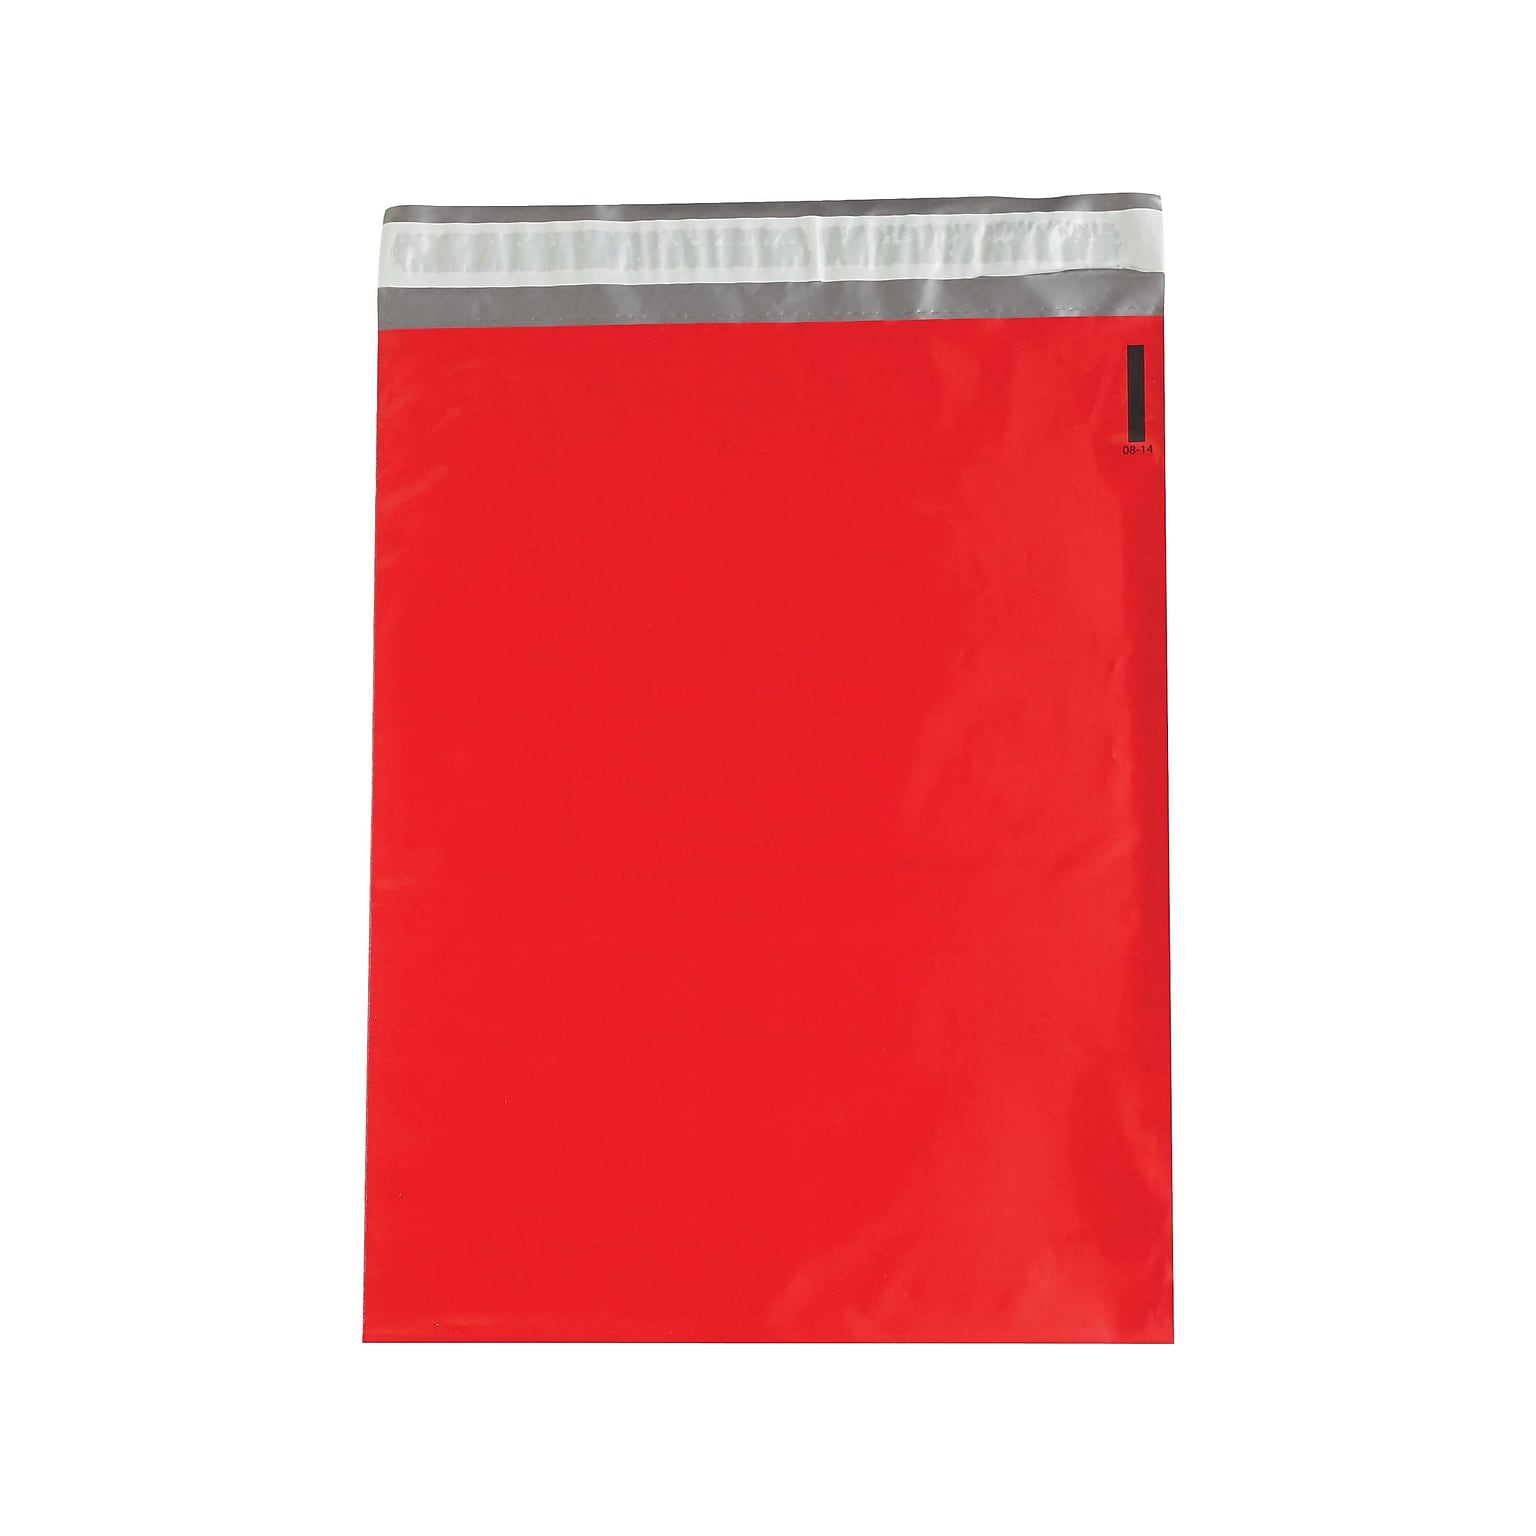 14.5W x 19L Peel & Seal Colored Poly Mailer, Red, 100/Carton (CPM1419R)